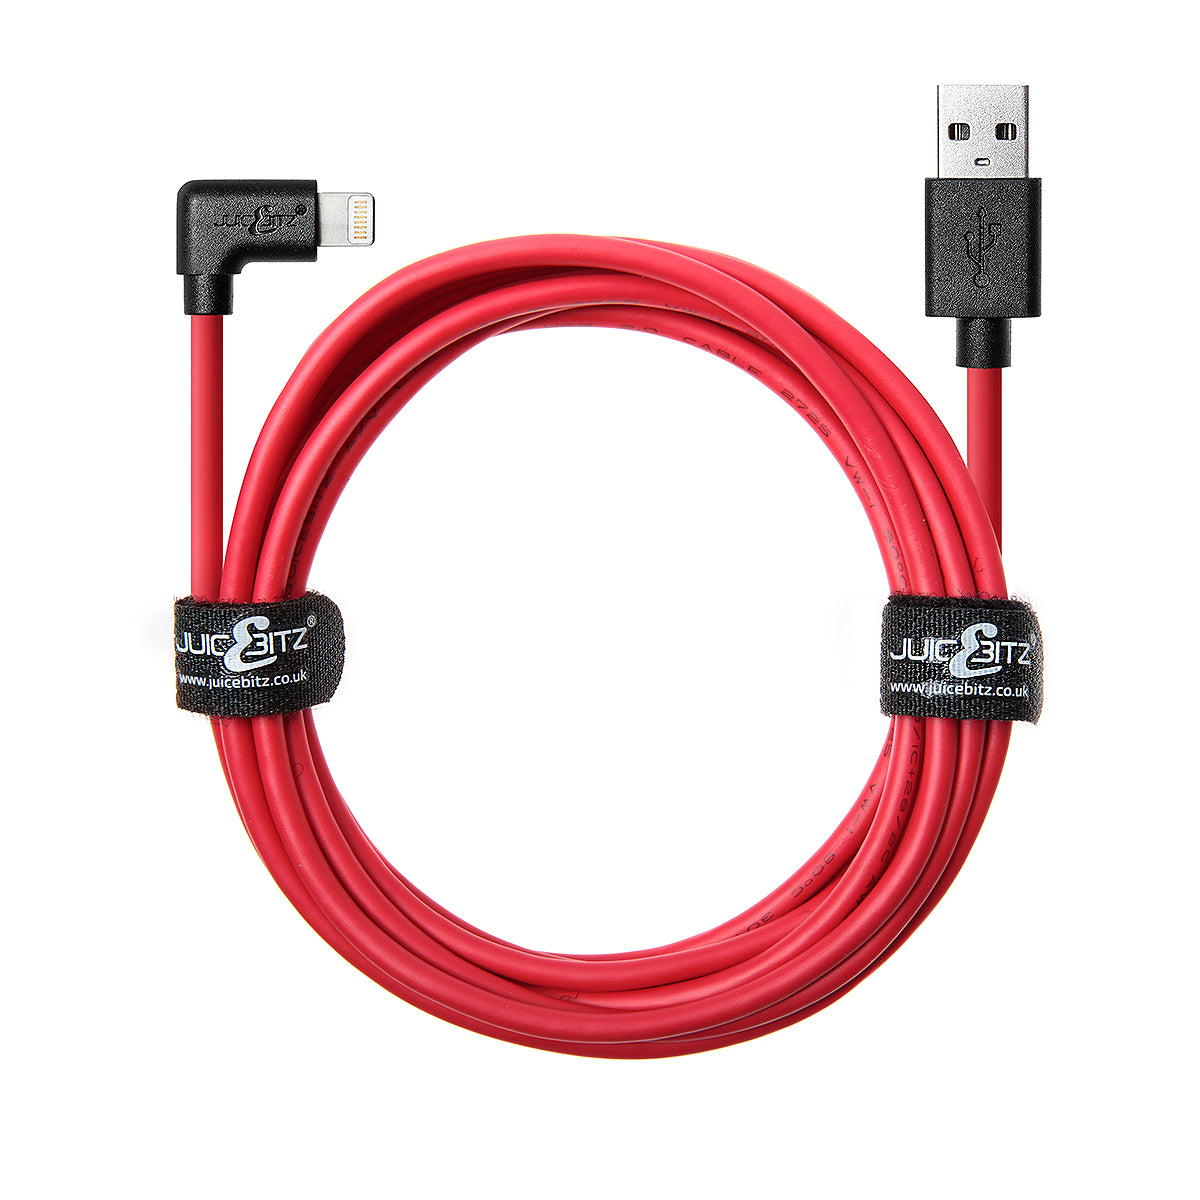 Heavy Duty Angled USB Charger Cable Data Sync Lead for iPhone, iPad, iPod - Red